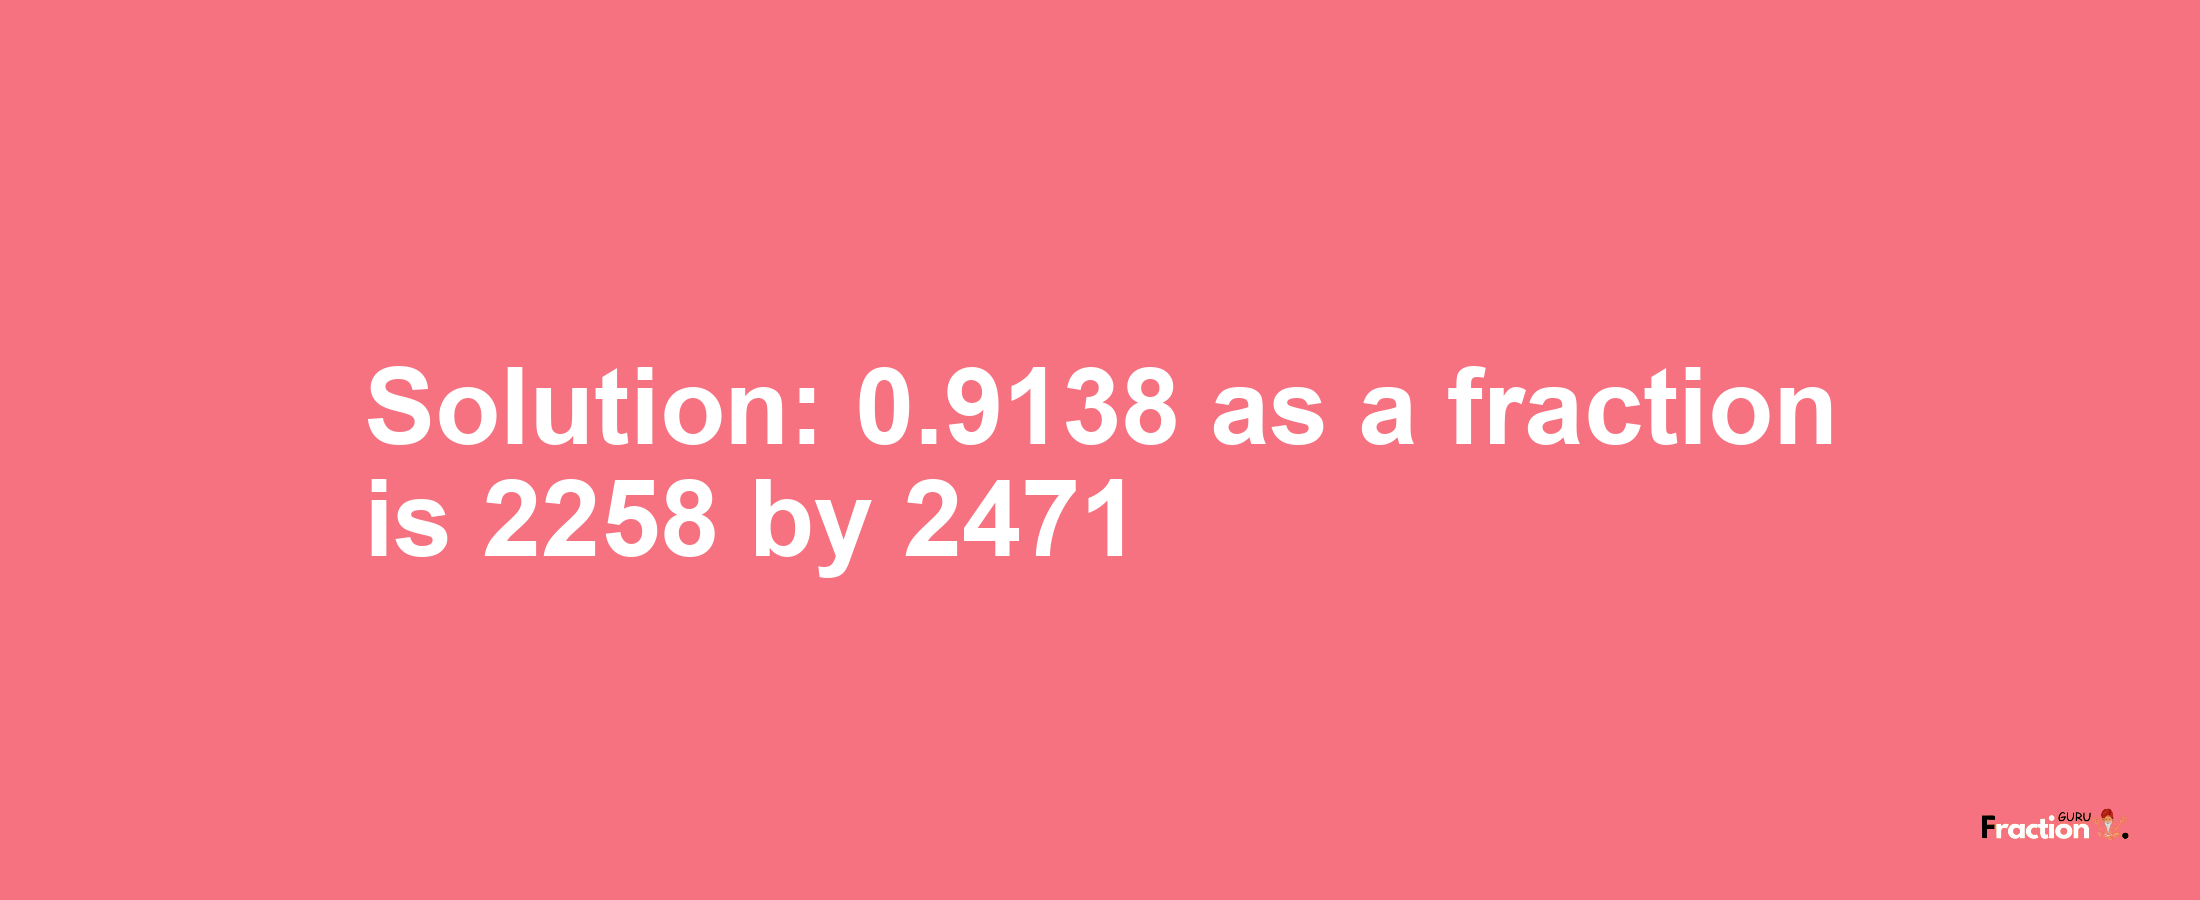 Solution:0.9138 as a fraction is 2258/2471